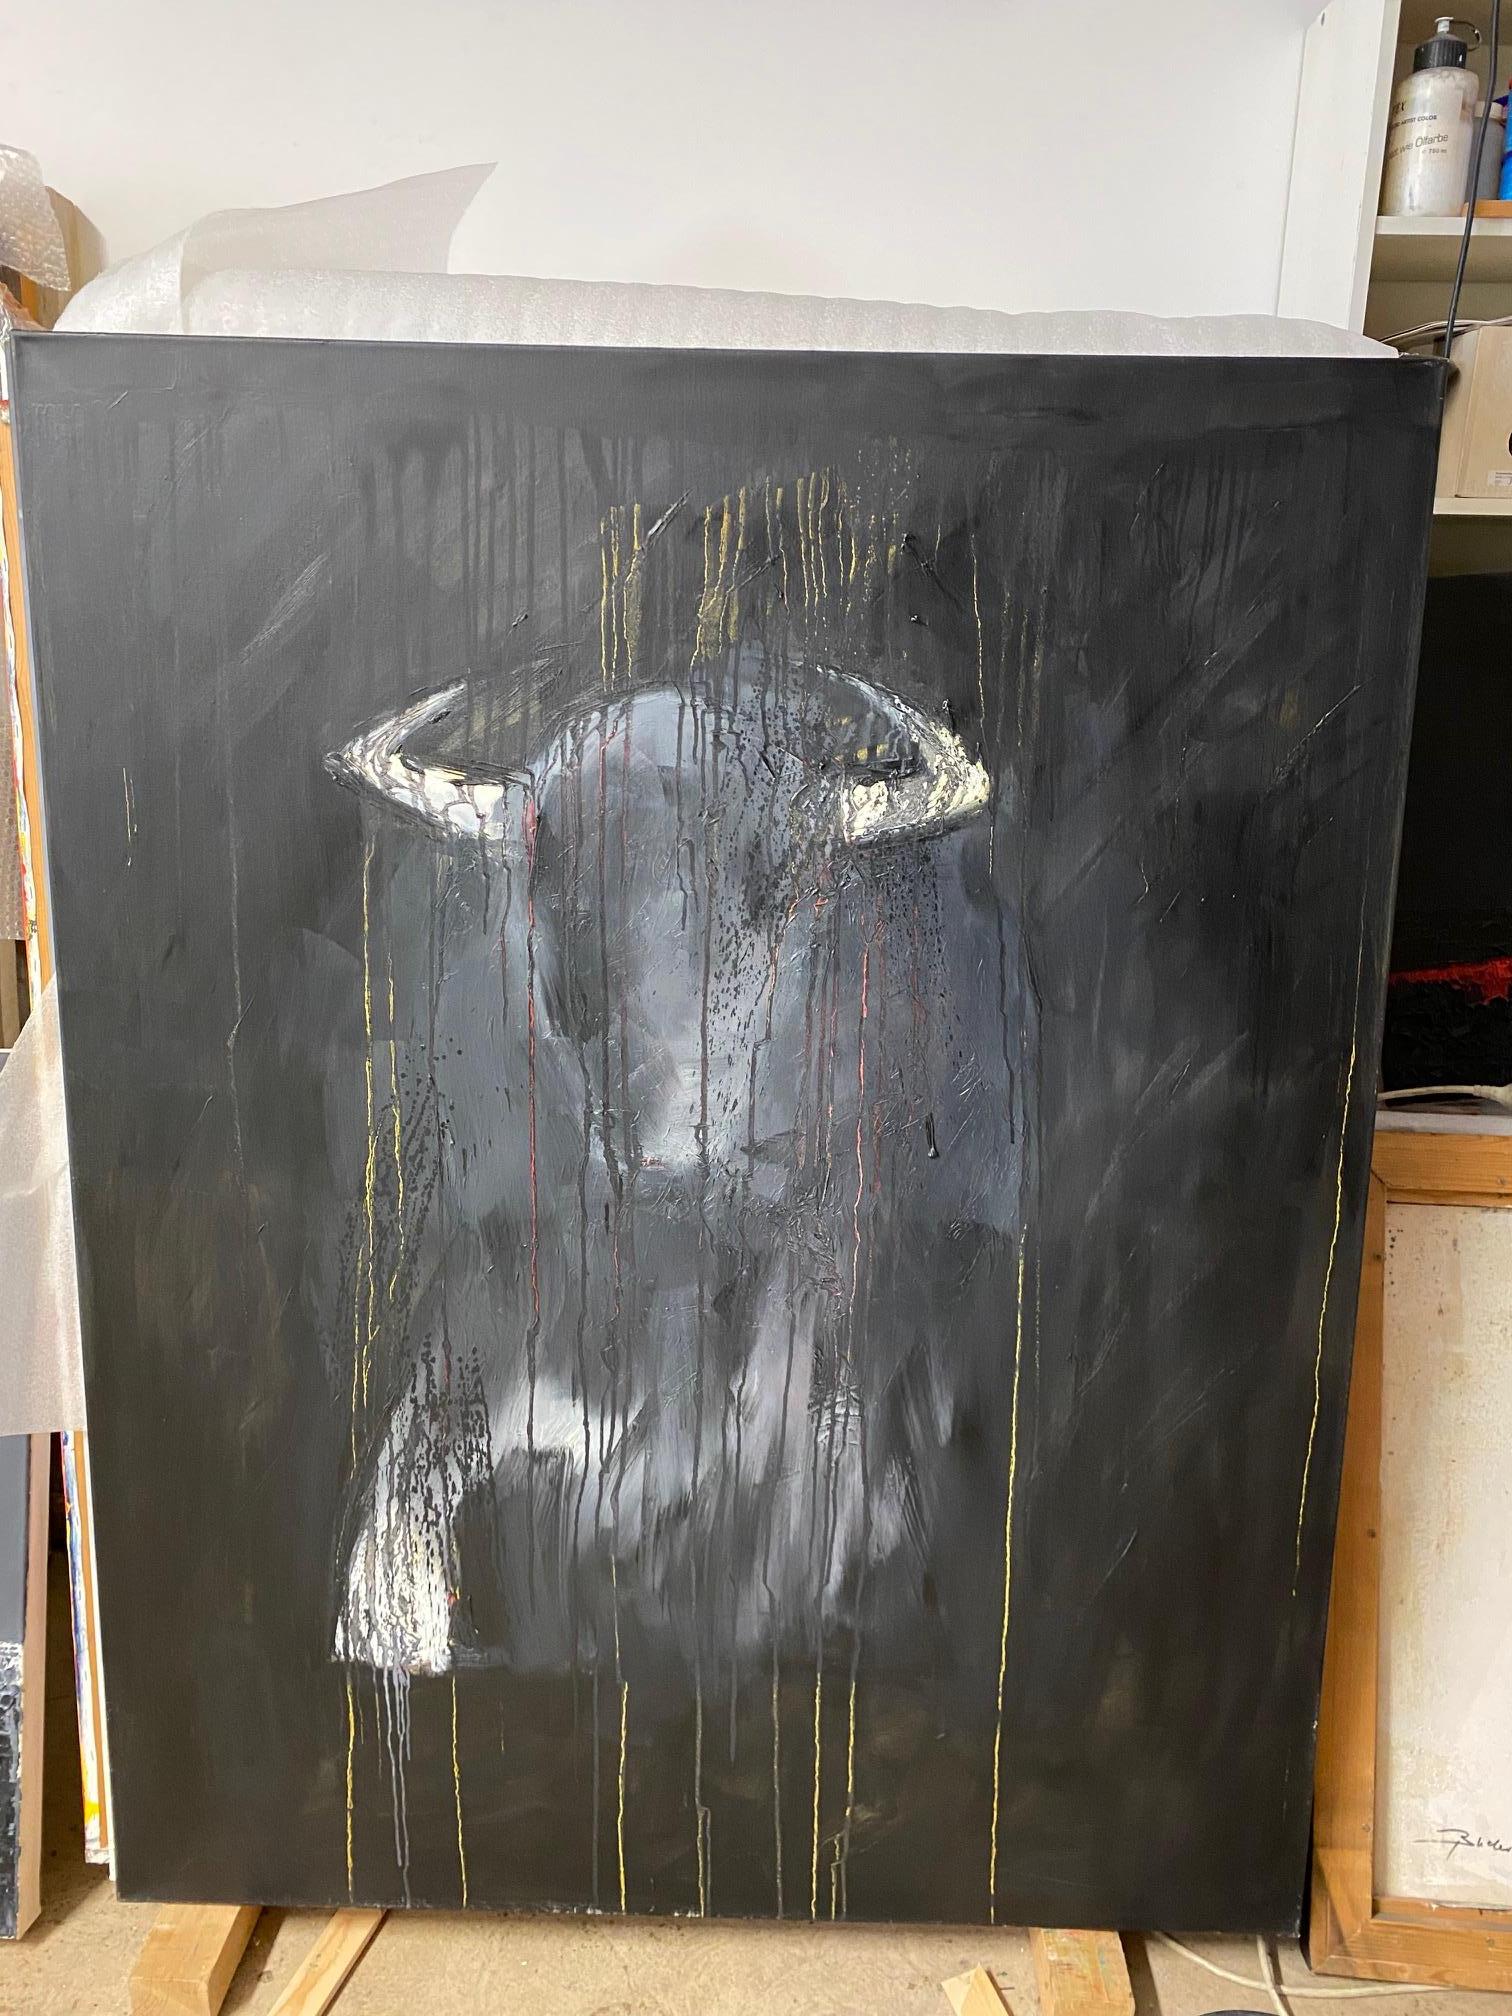 Bull - contemporary expressionistic painting of charging bull, abstract backdrop - Painting by Willi Bucher